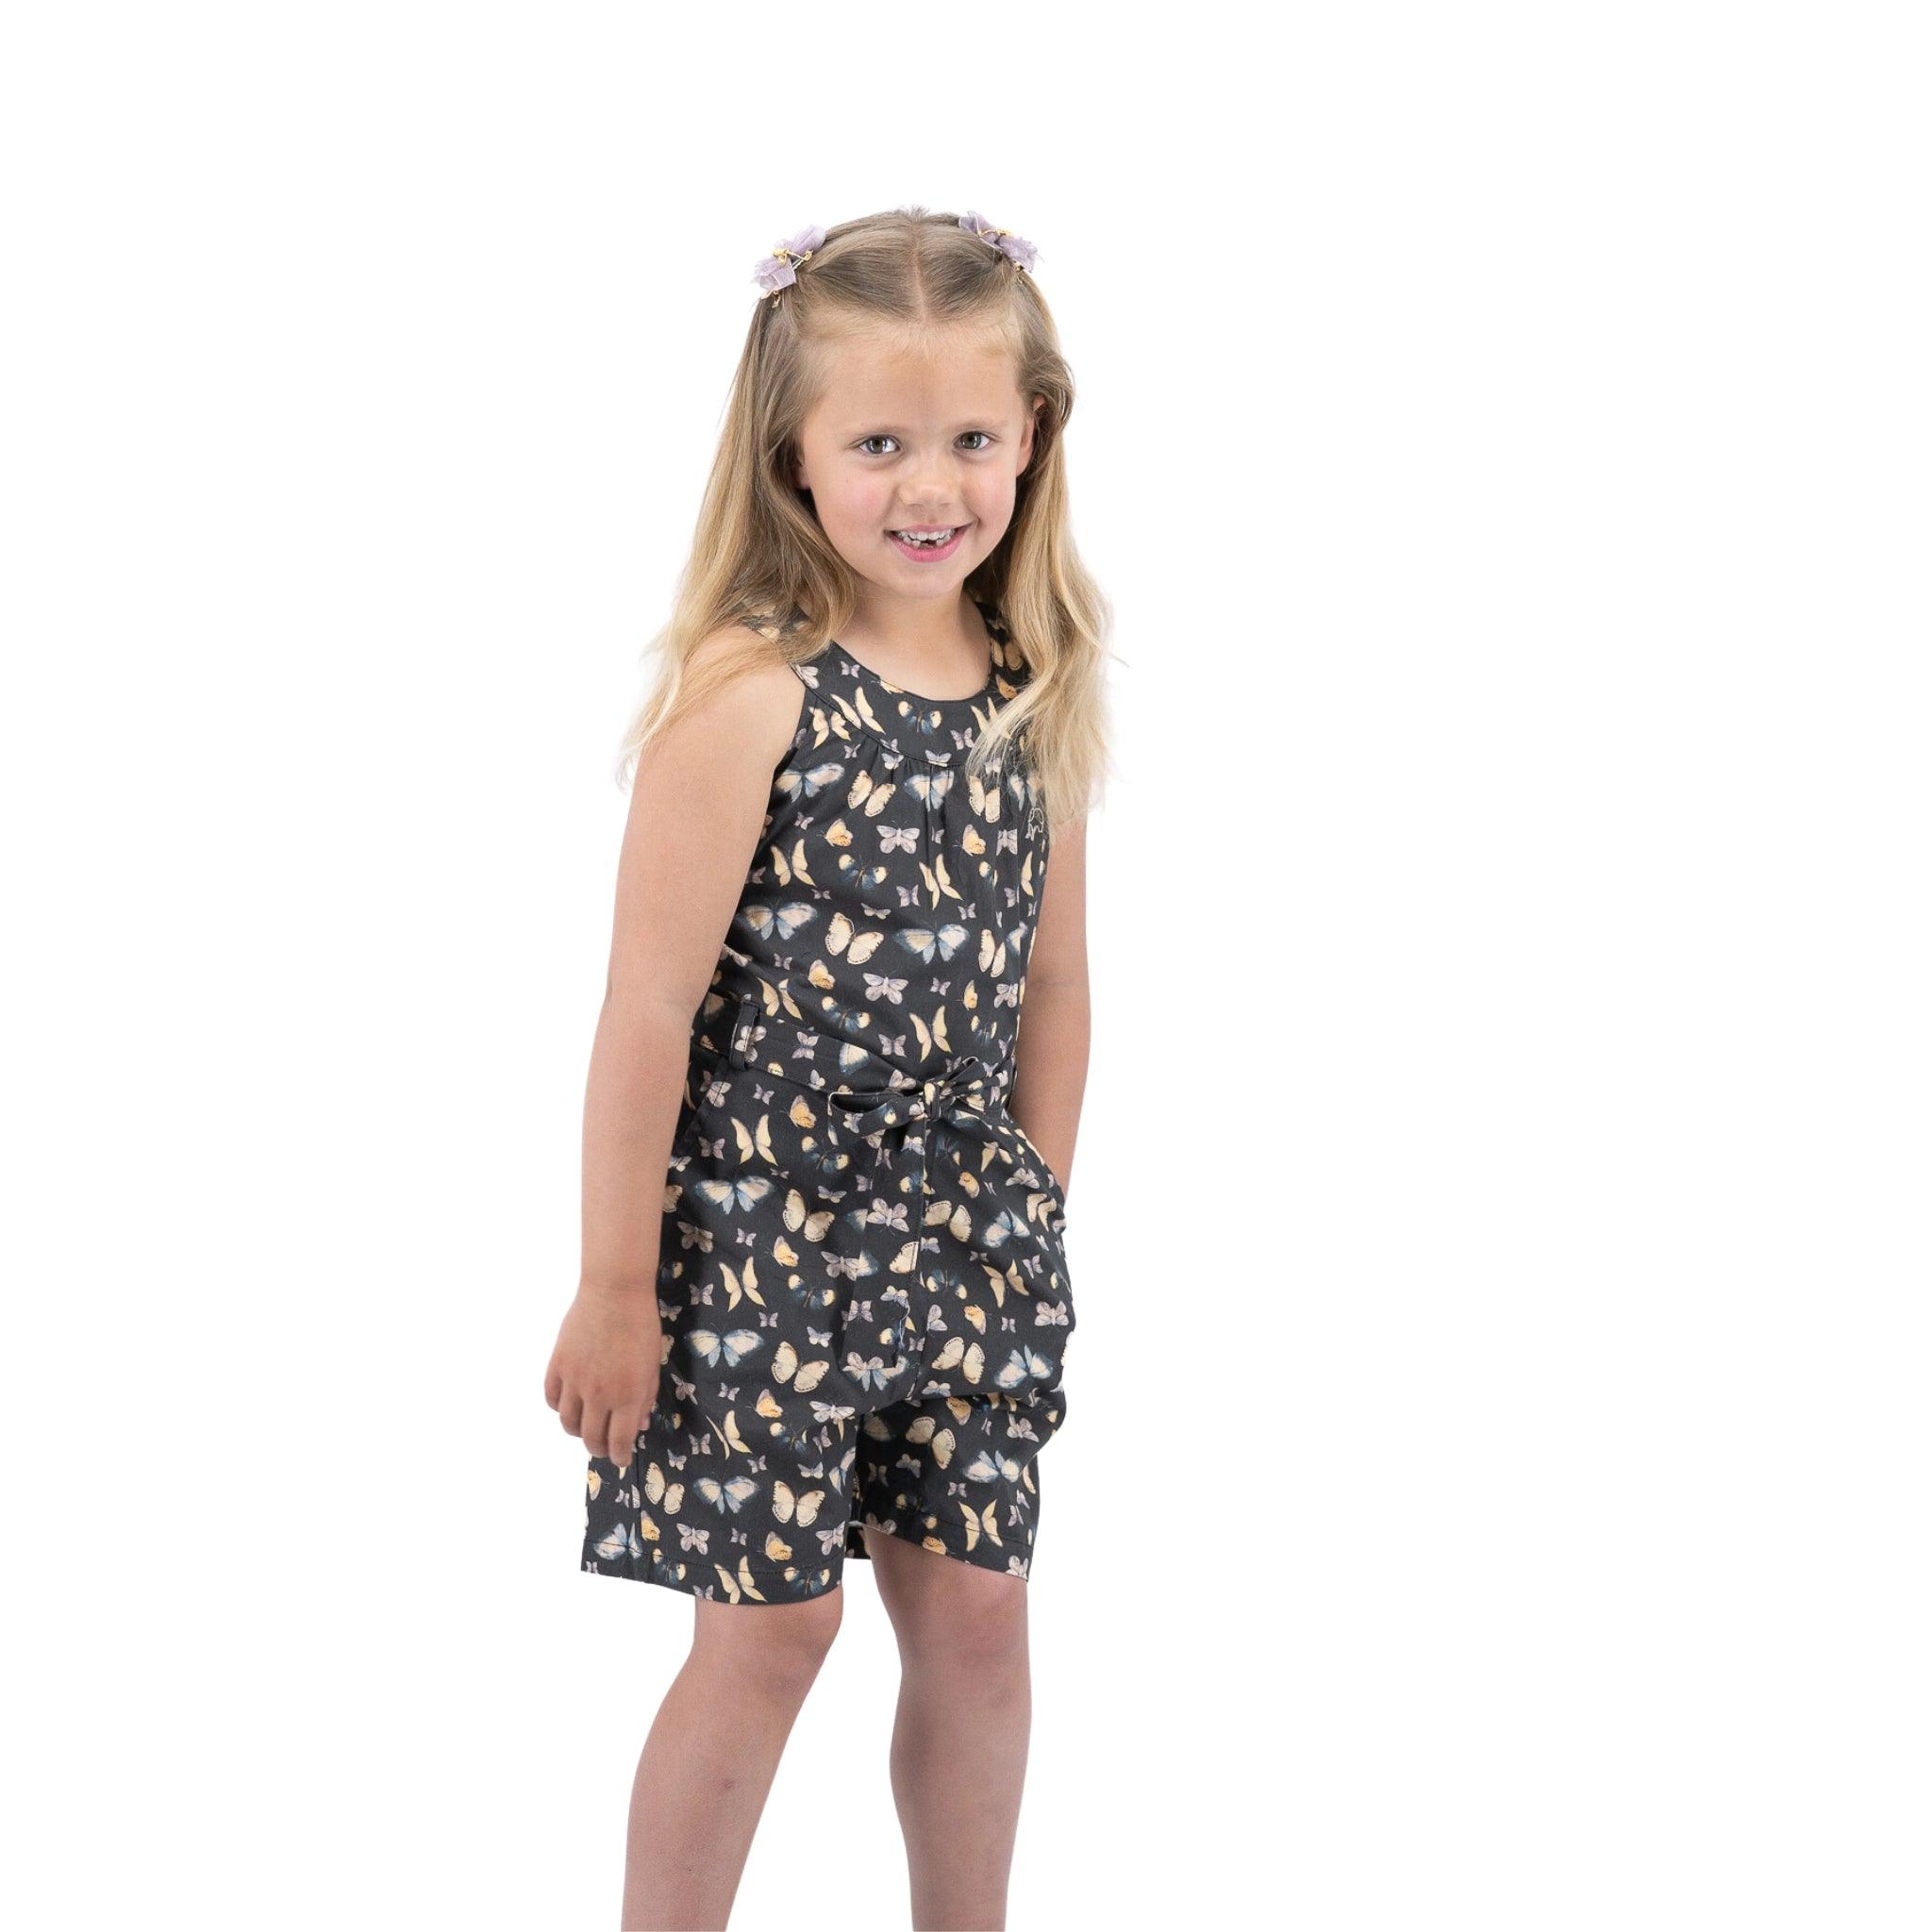 Young girl in a Karee Pirate Black Adventure-ready Cotton Play Suit for girls smiling and looking to the side against a white background.